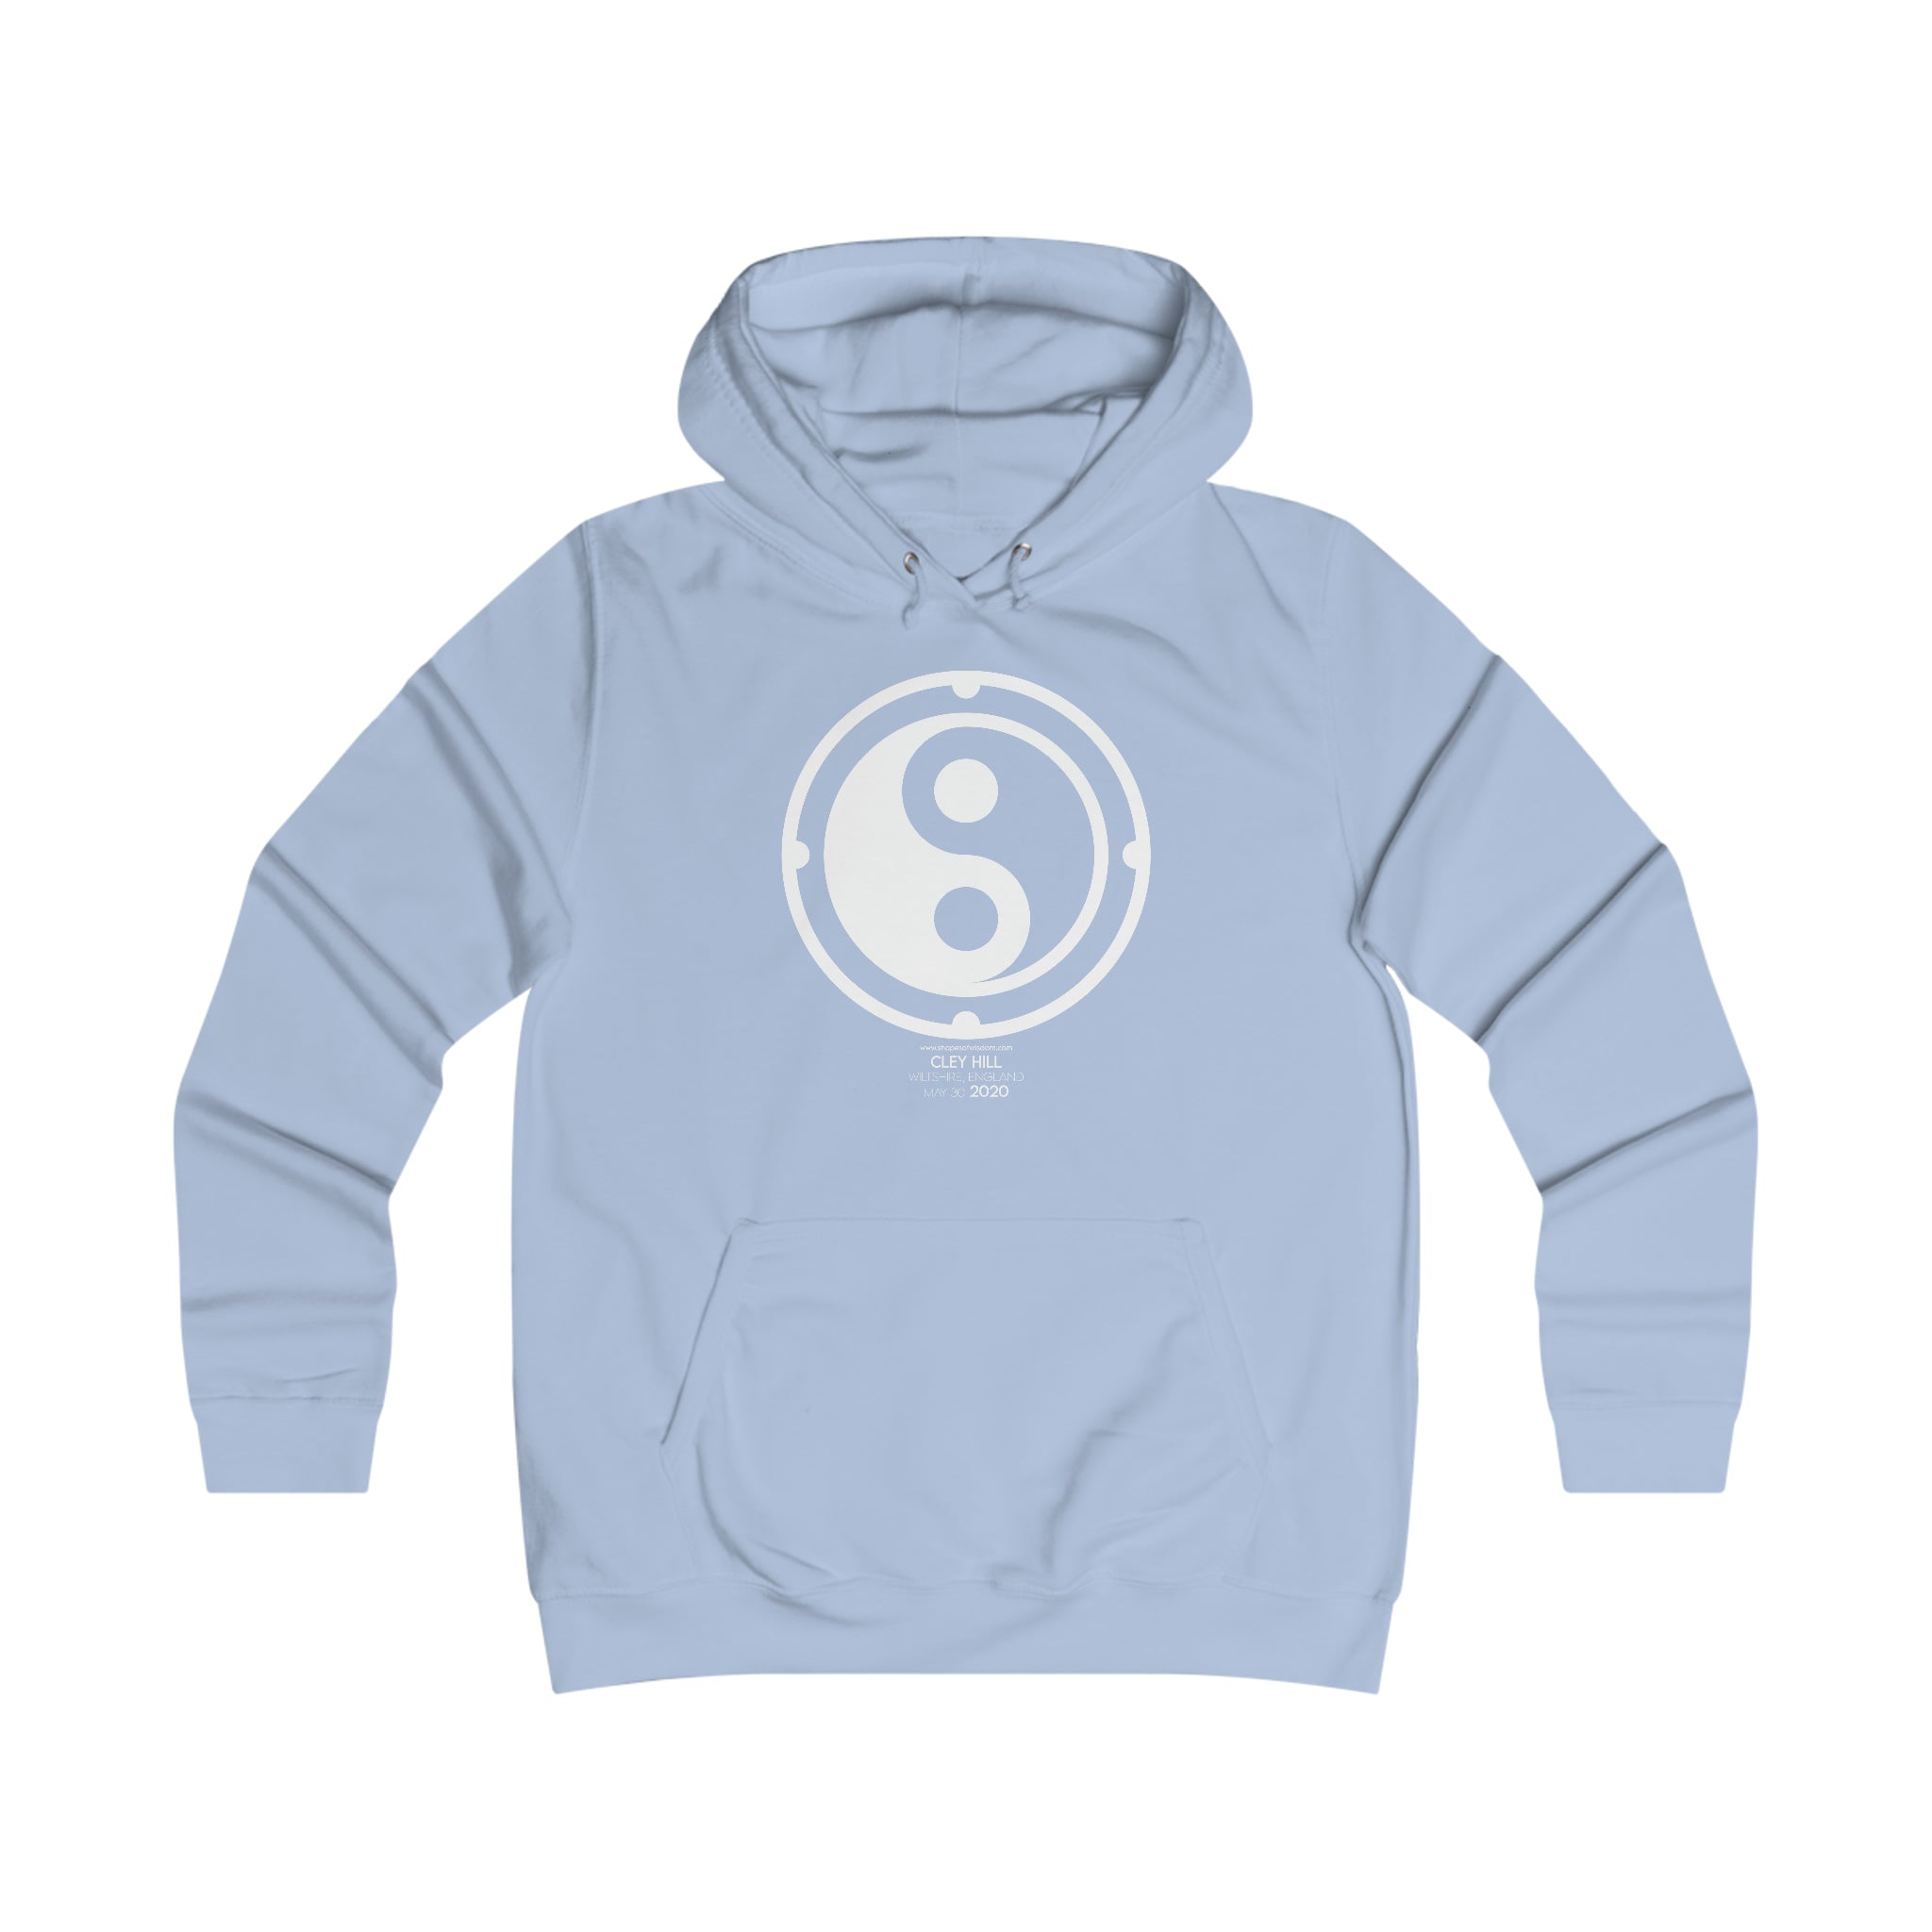 Crop Circle Girl College Hoodie - Cley Hill 4